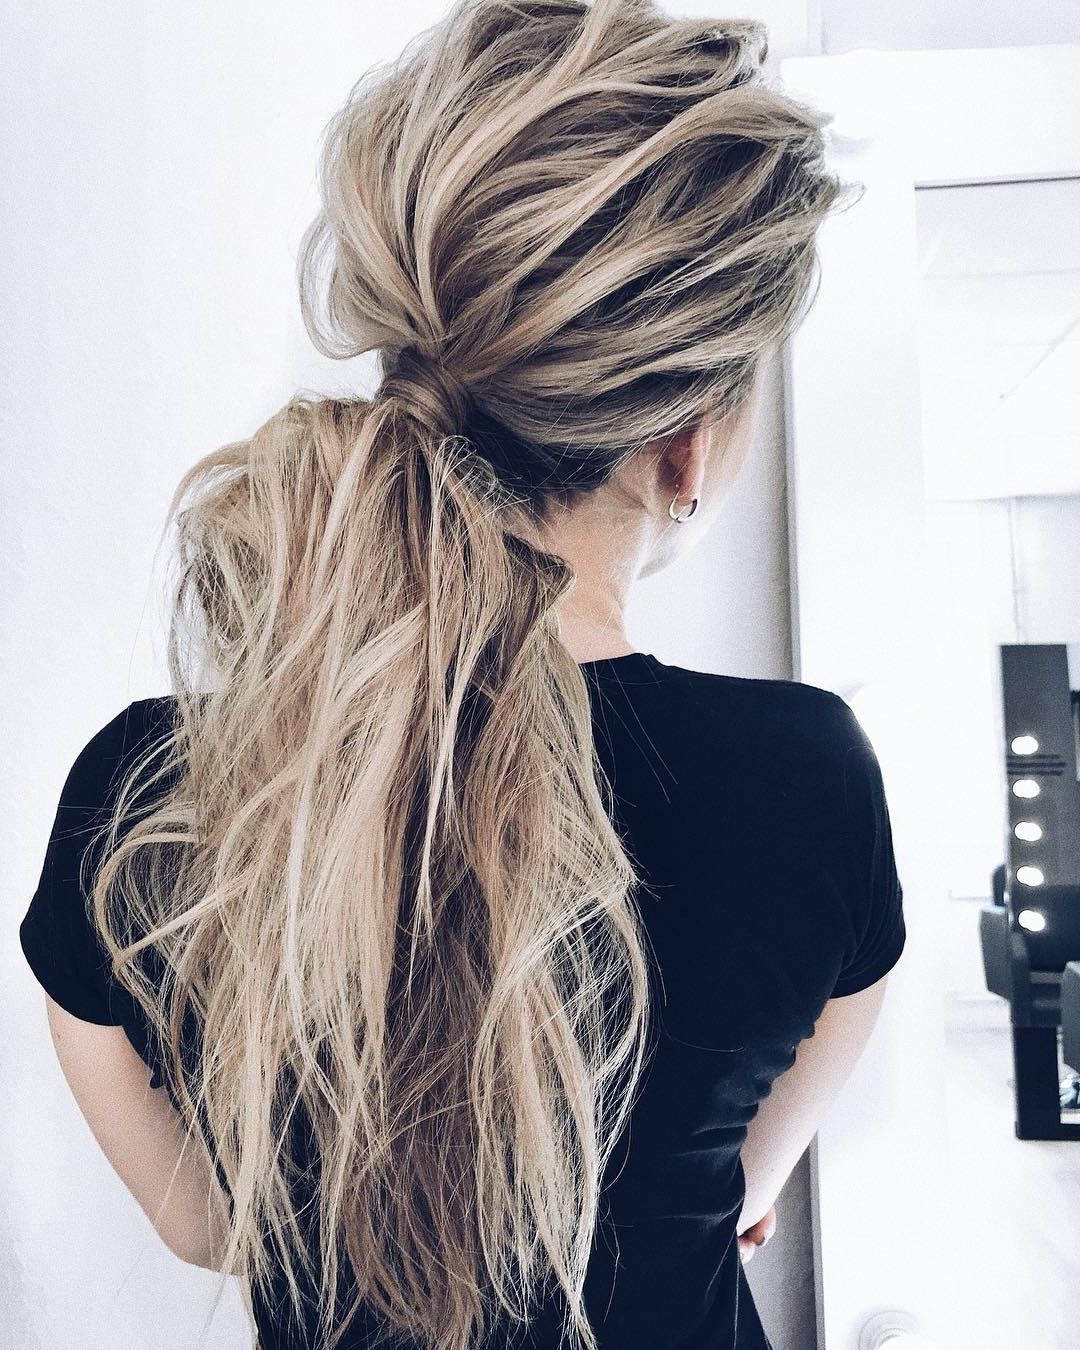 10 Creative Ponytail Hairstyles For Long Hair, Summer Hairstyle For 2018 Trendy Two Tone Braided Ponytails (View 15 of 20)